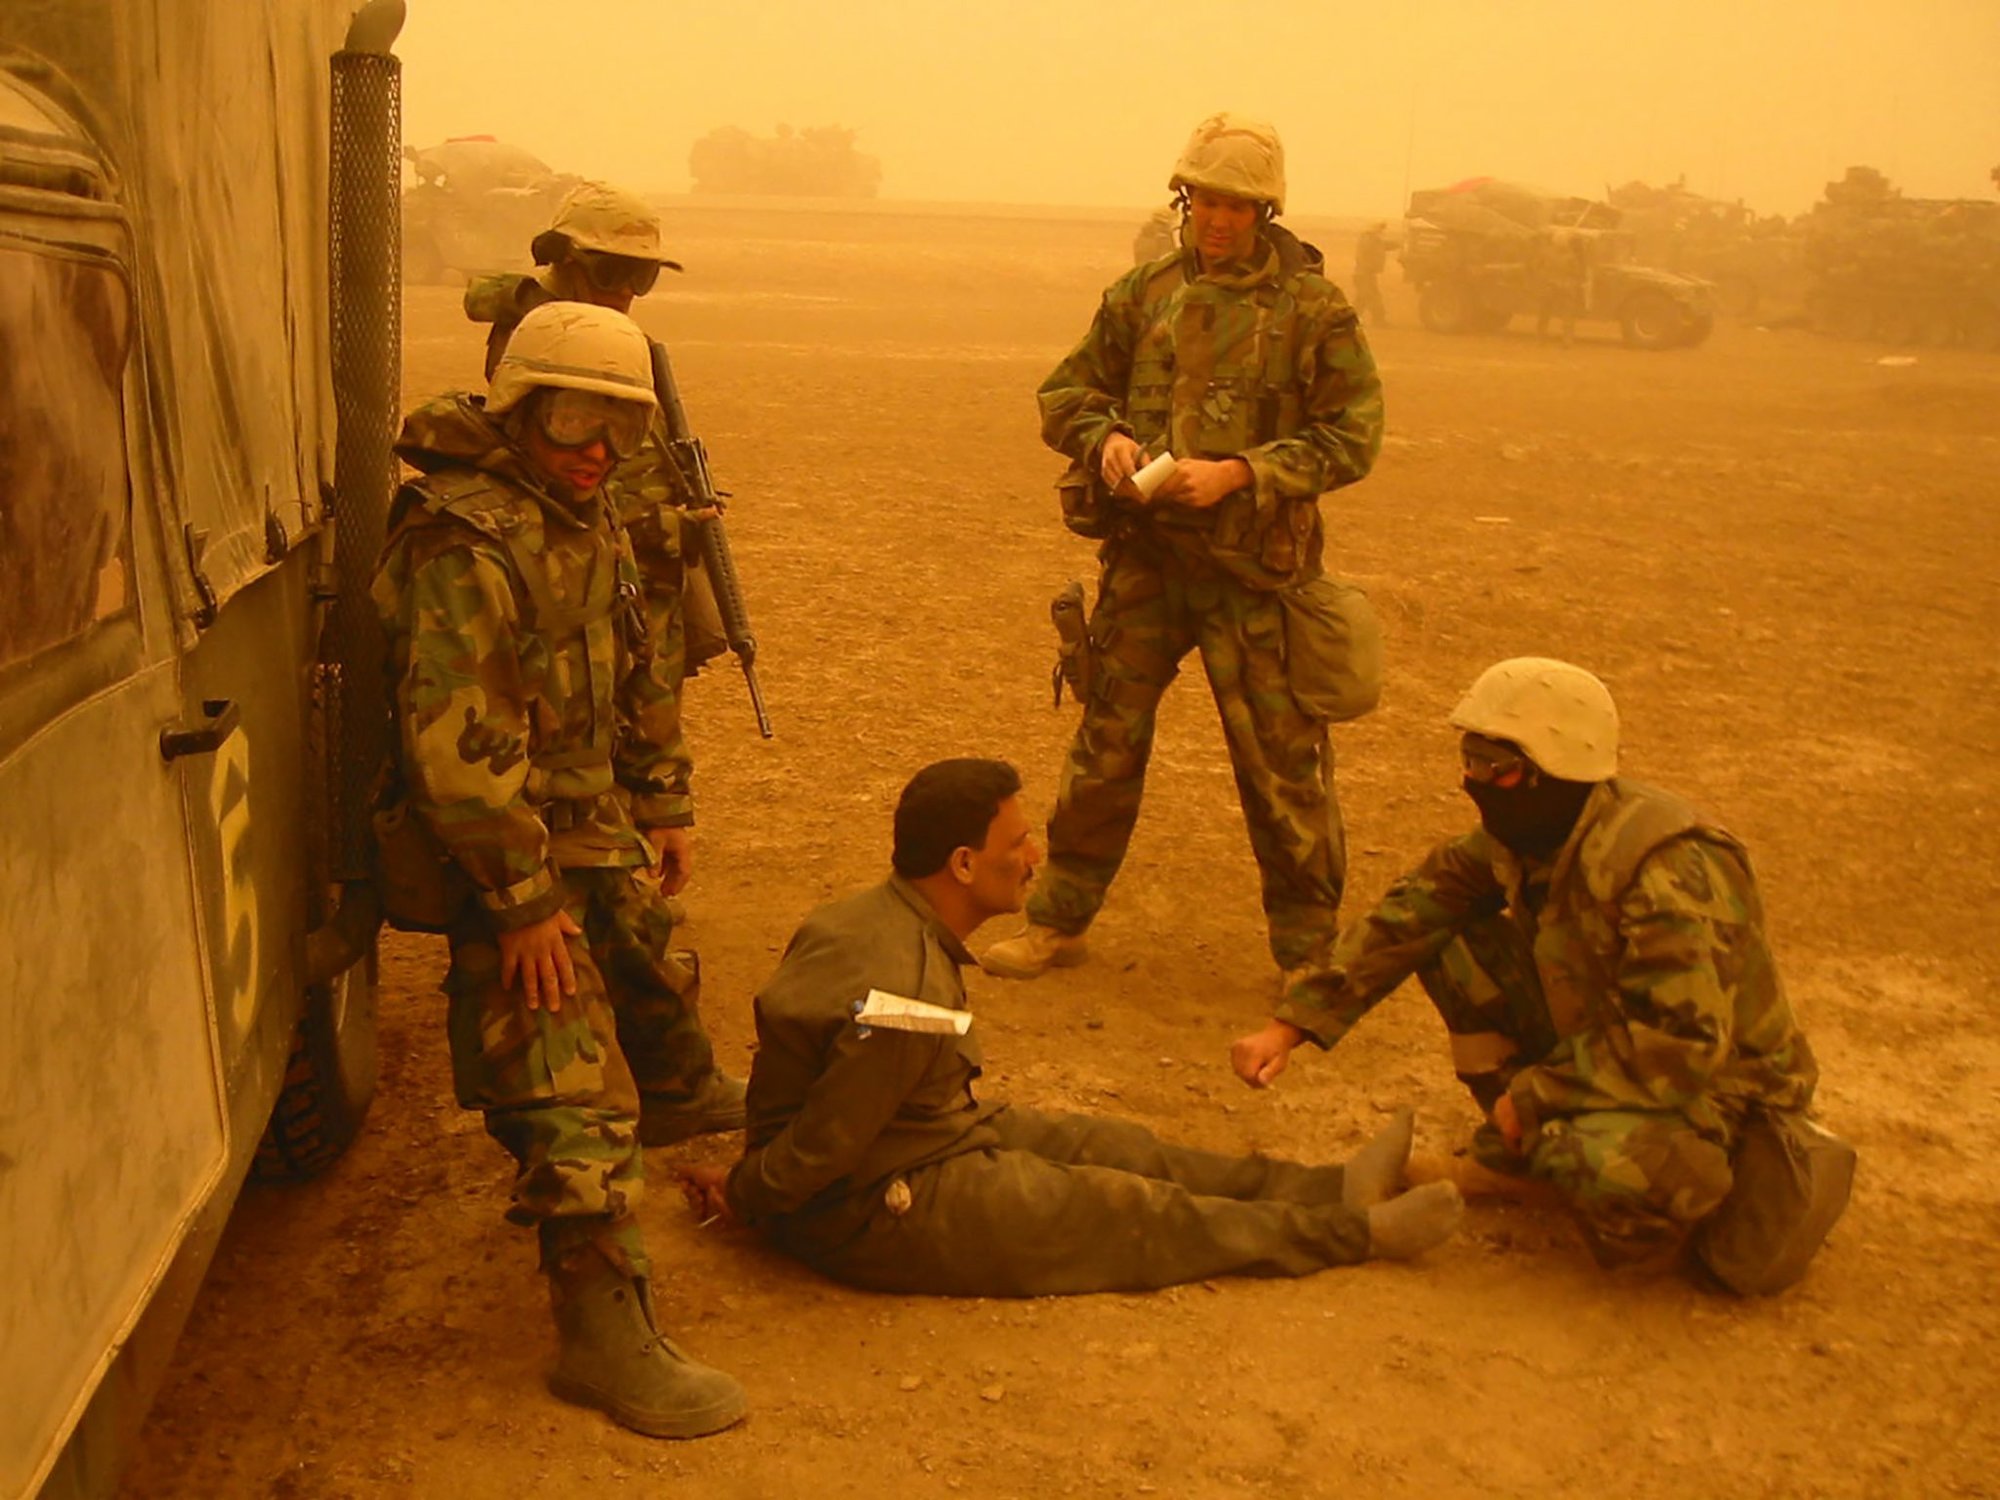 Cheating Death in Ramadi on the Luckiest St. Paddy's Day Ever